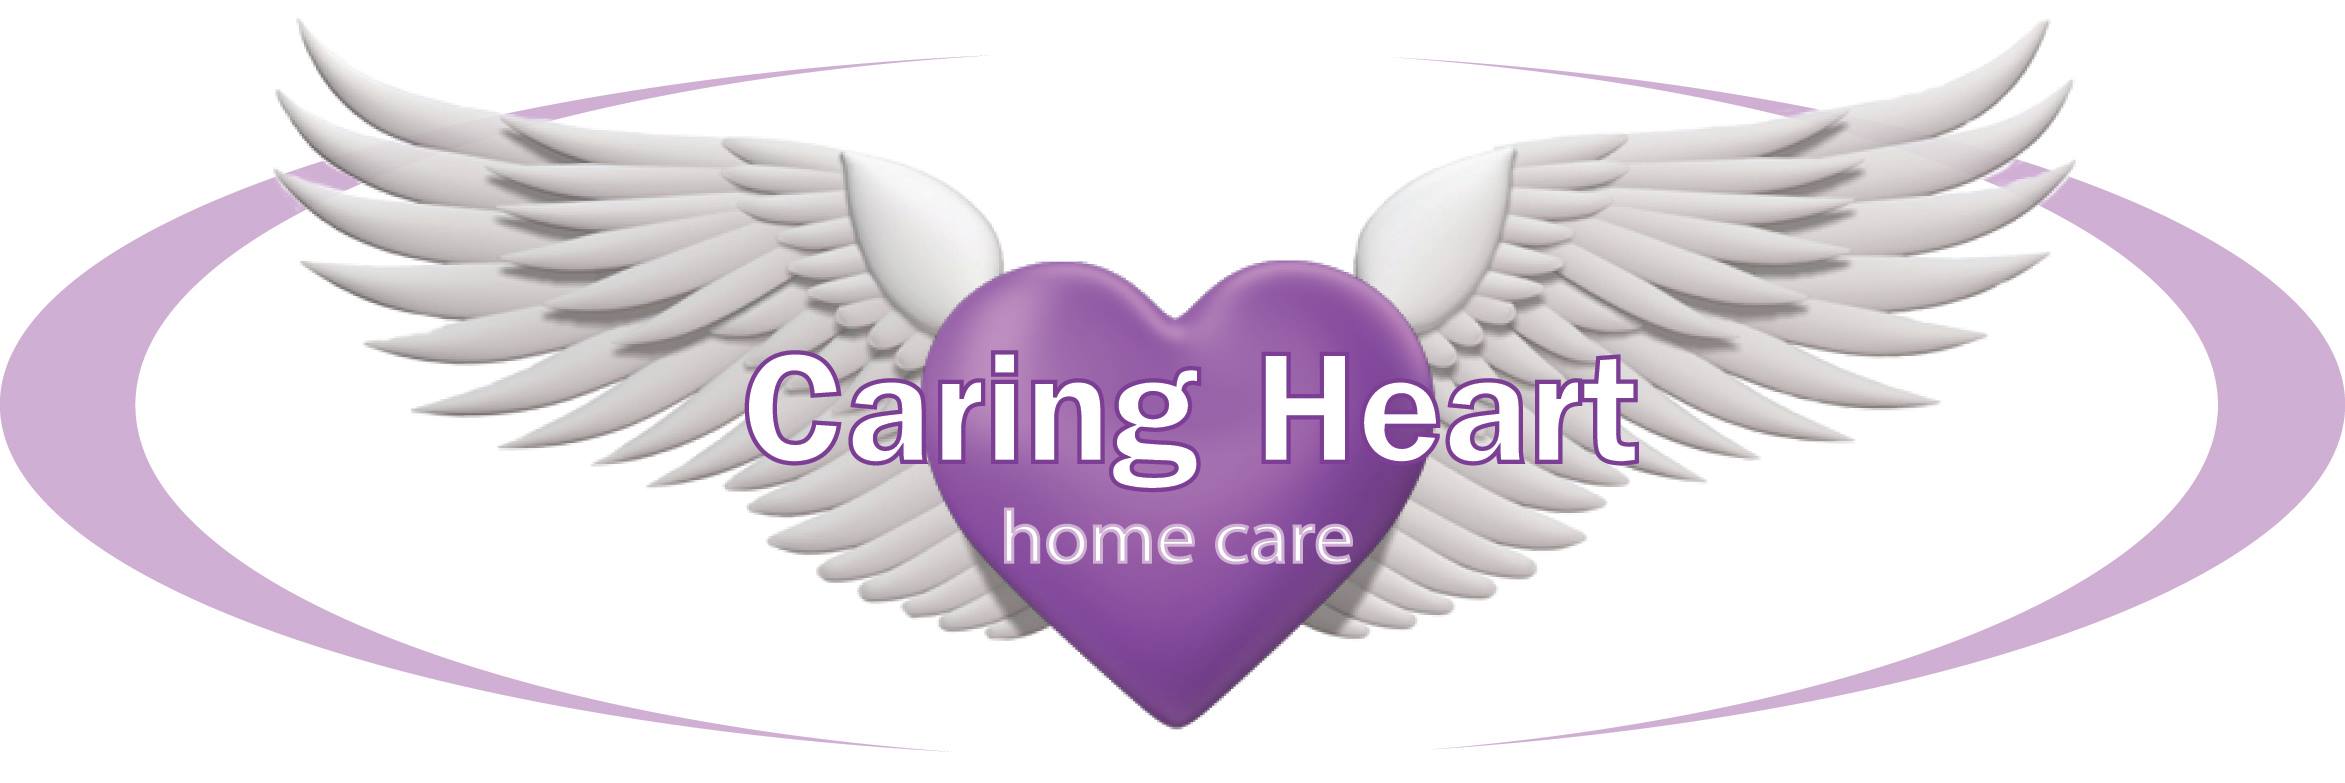 Caring Heart Home Care